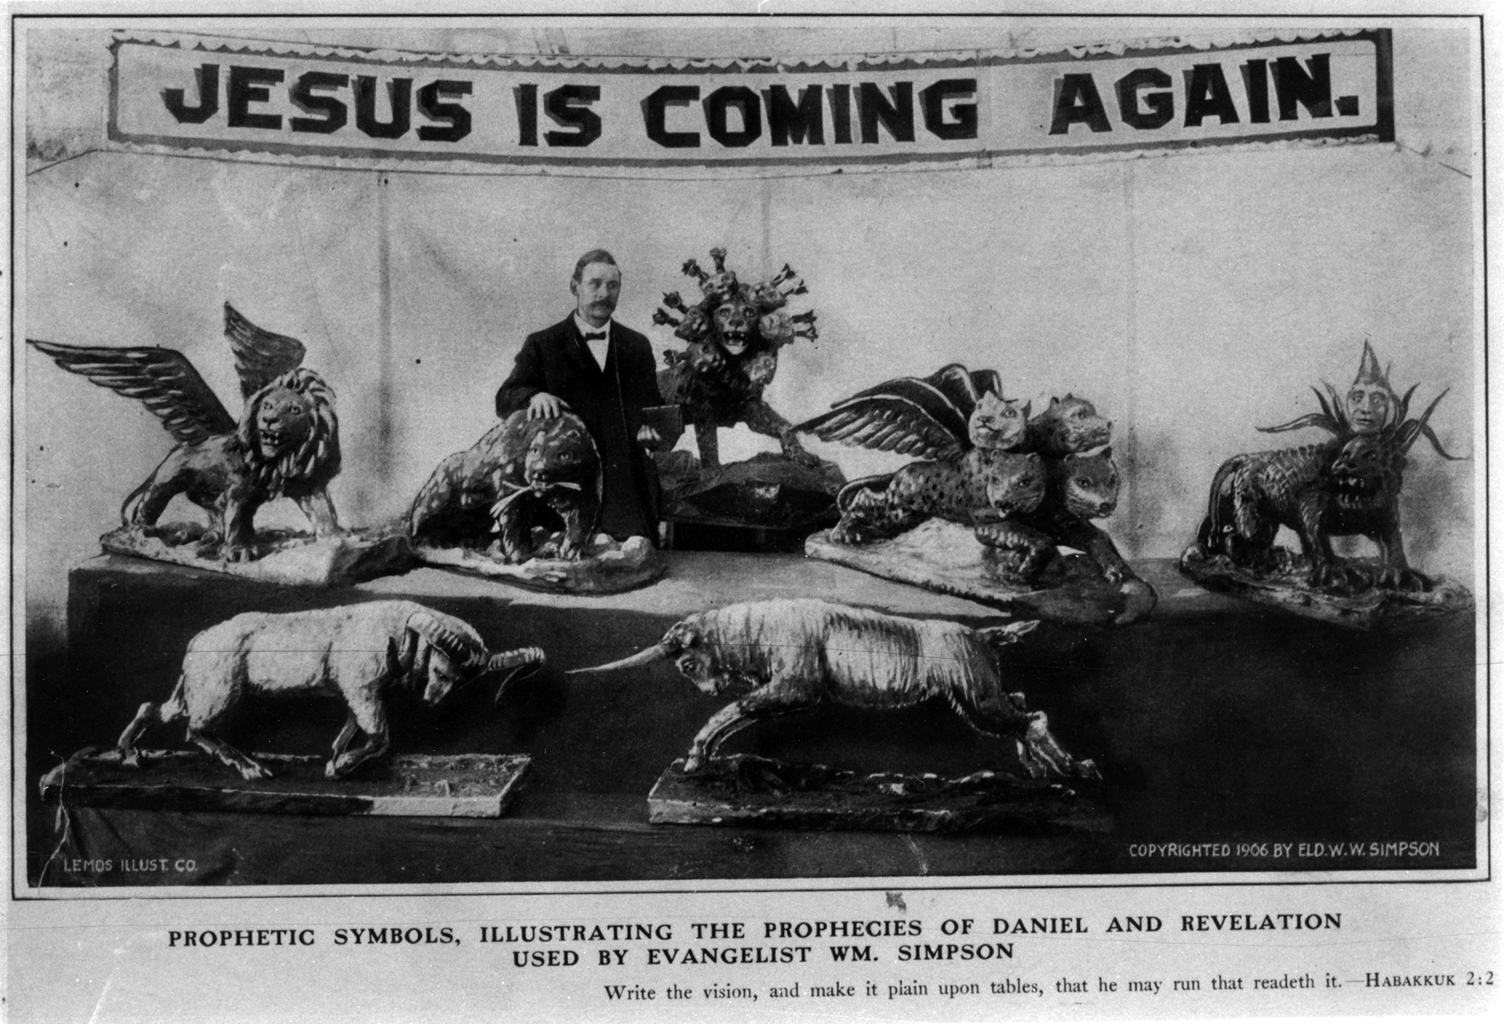 Man in suit standing with papier-mâché beasts under a banner that reads "Jesus is Coming Again."